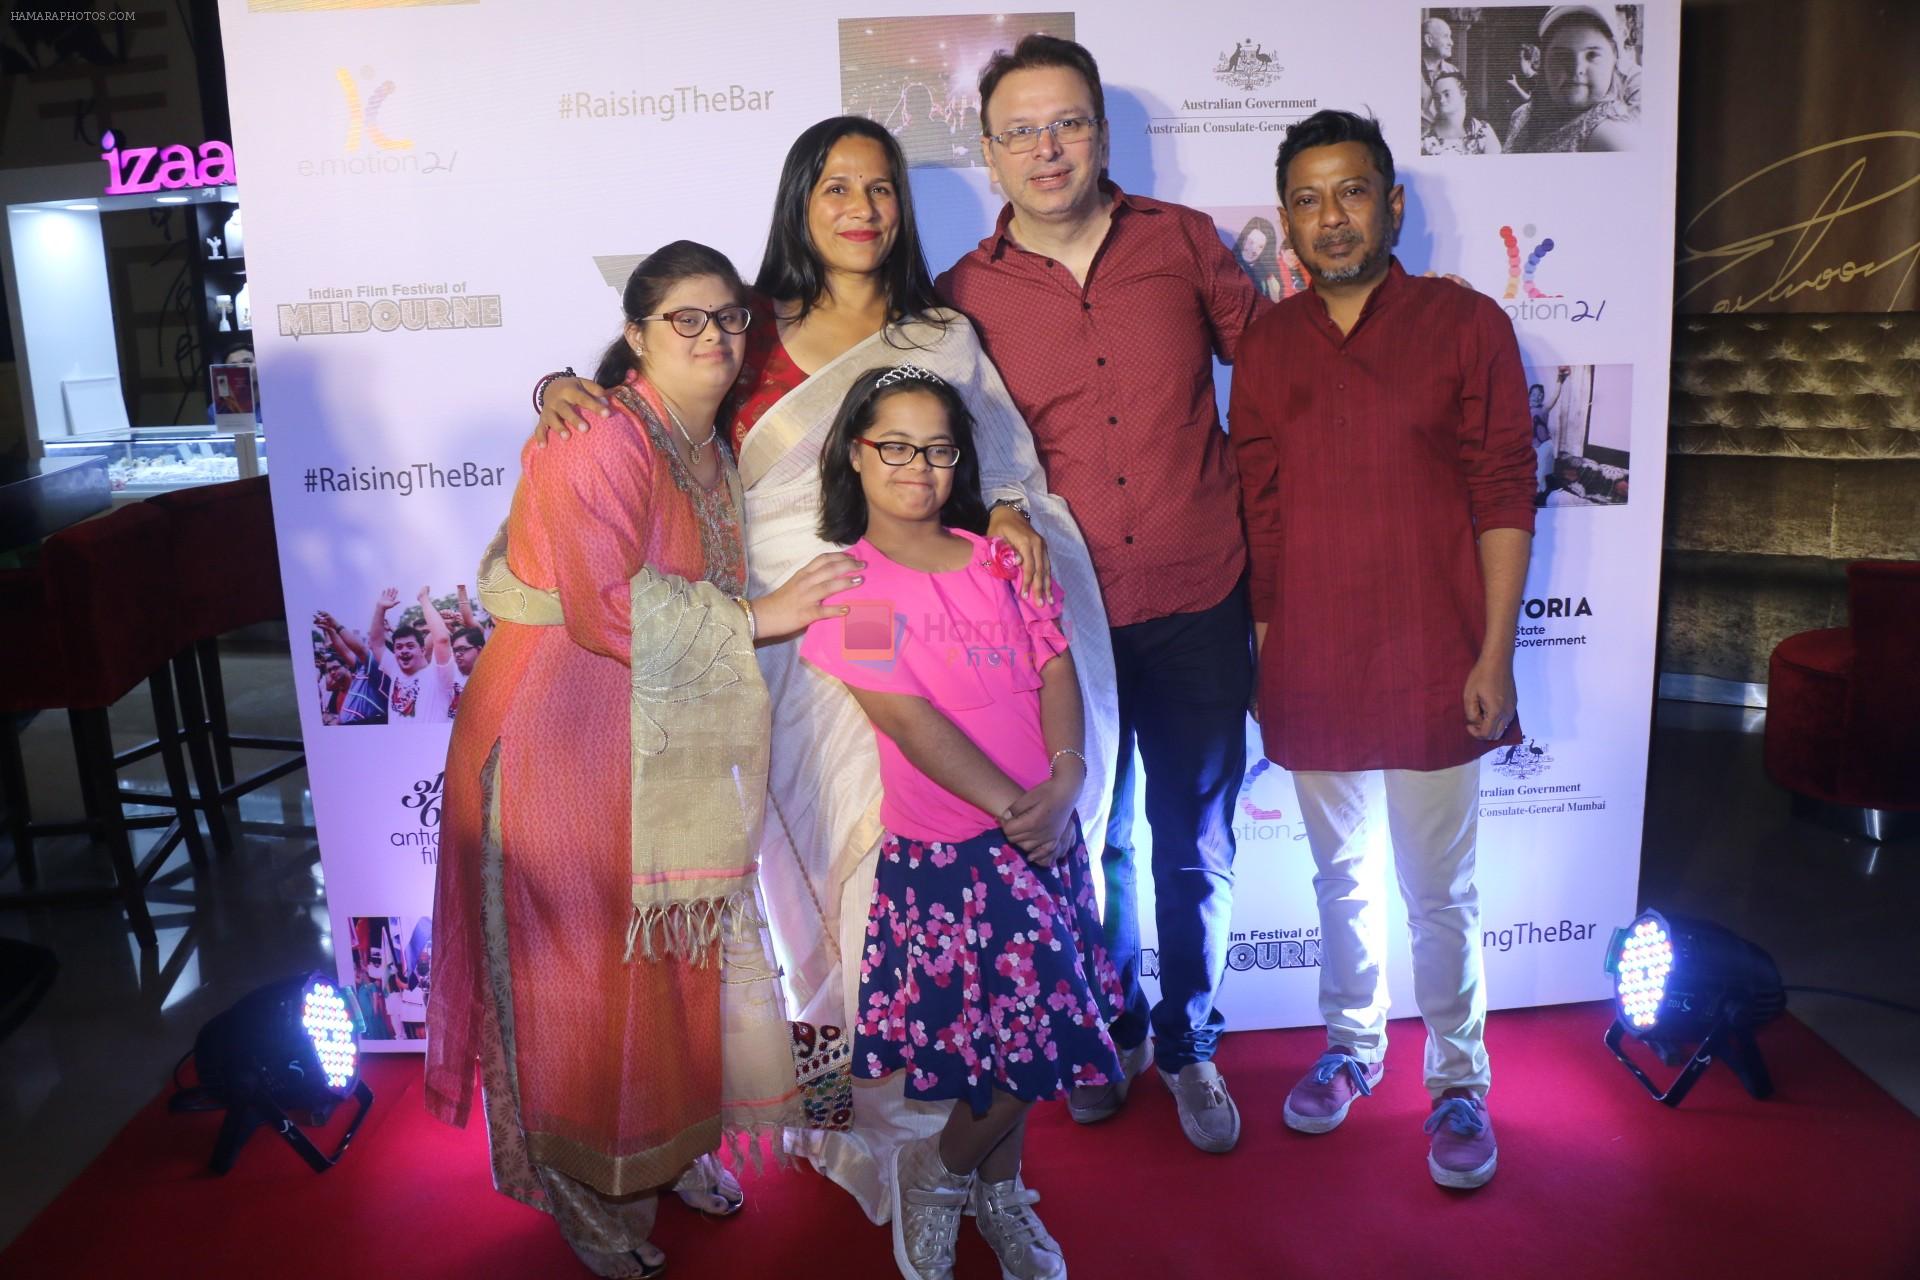 Onir at the Screening Of Onir's Documentary On Kids With Down Syndrome